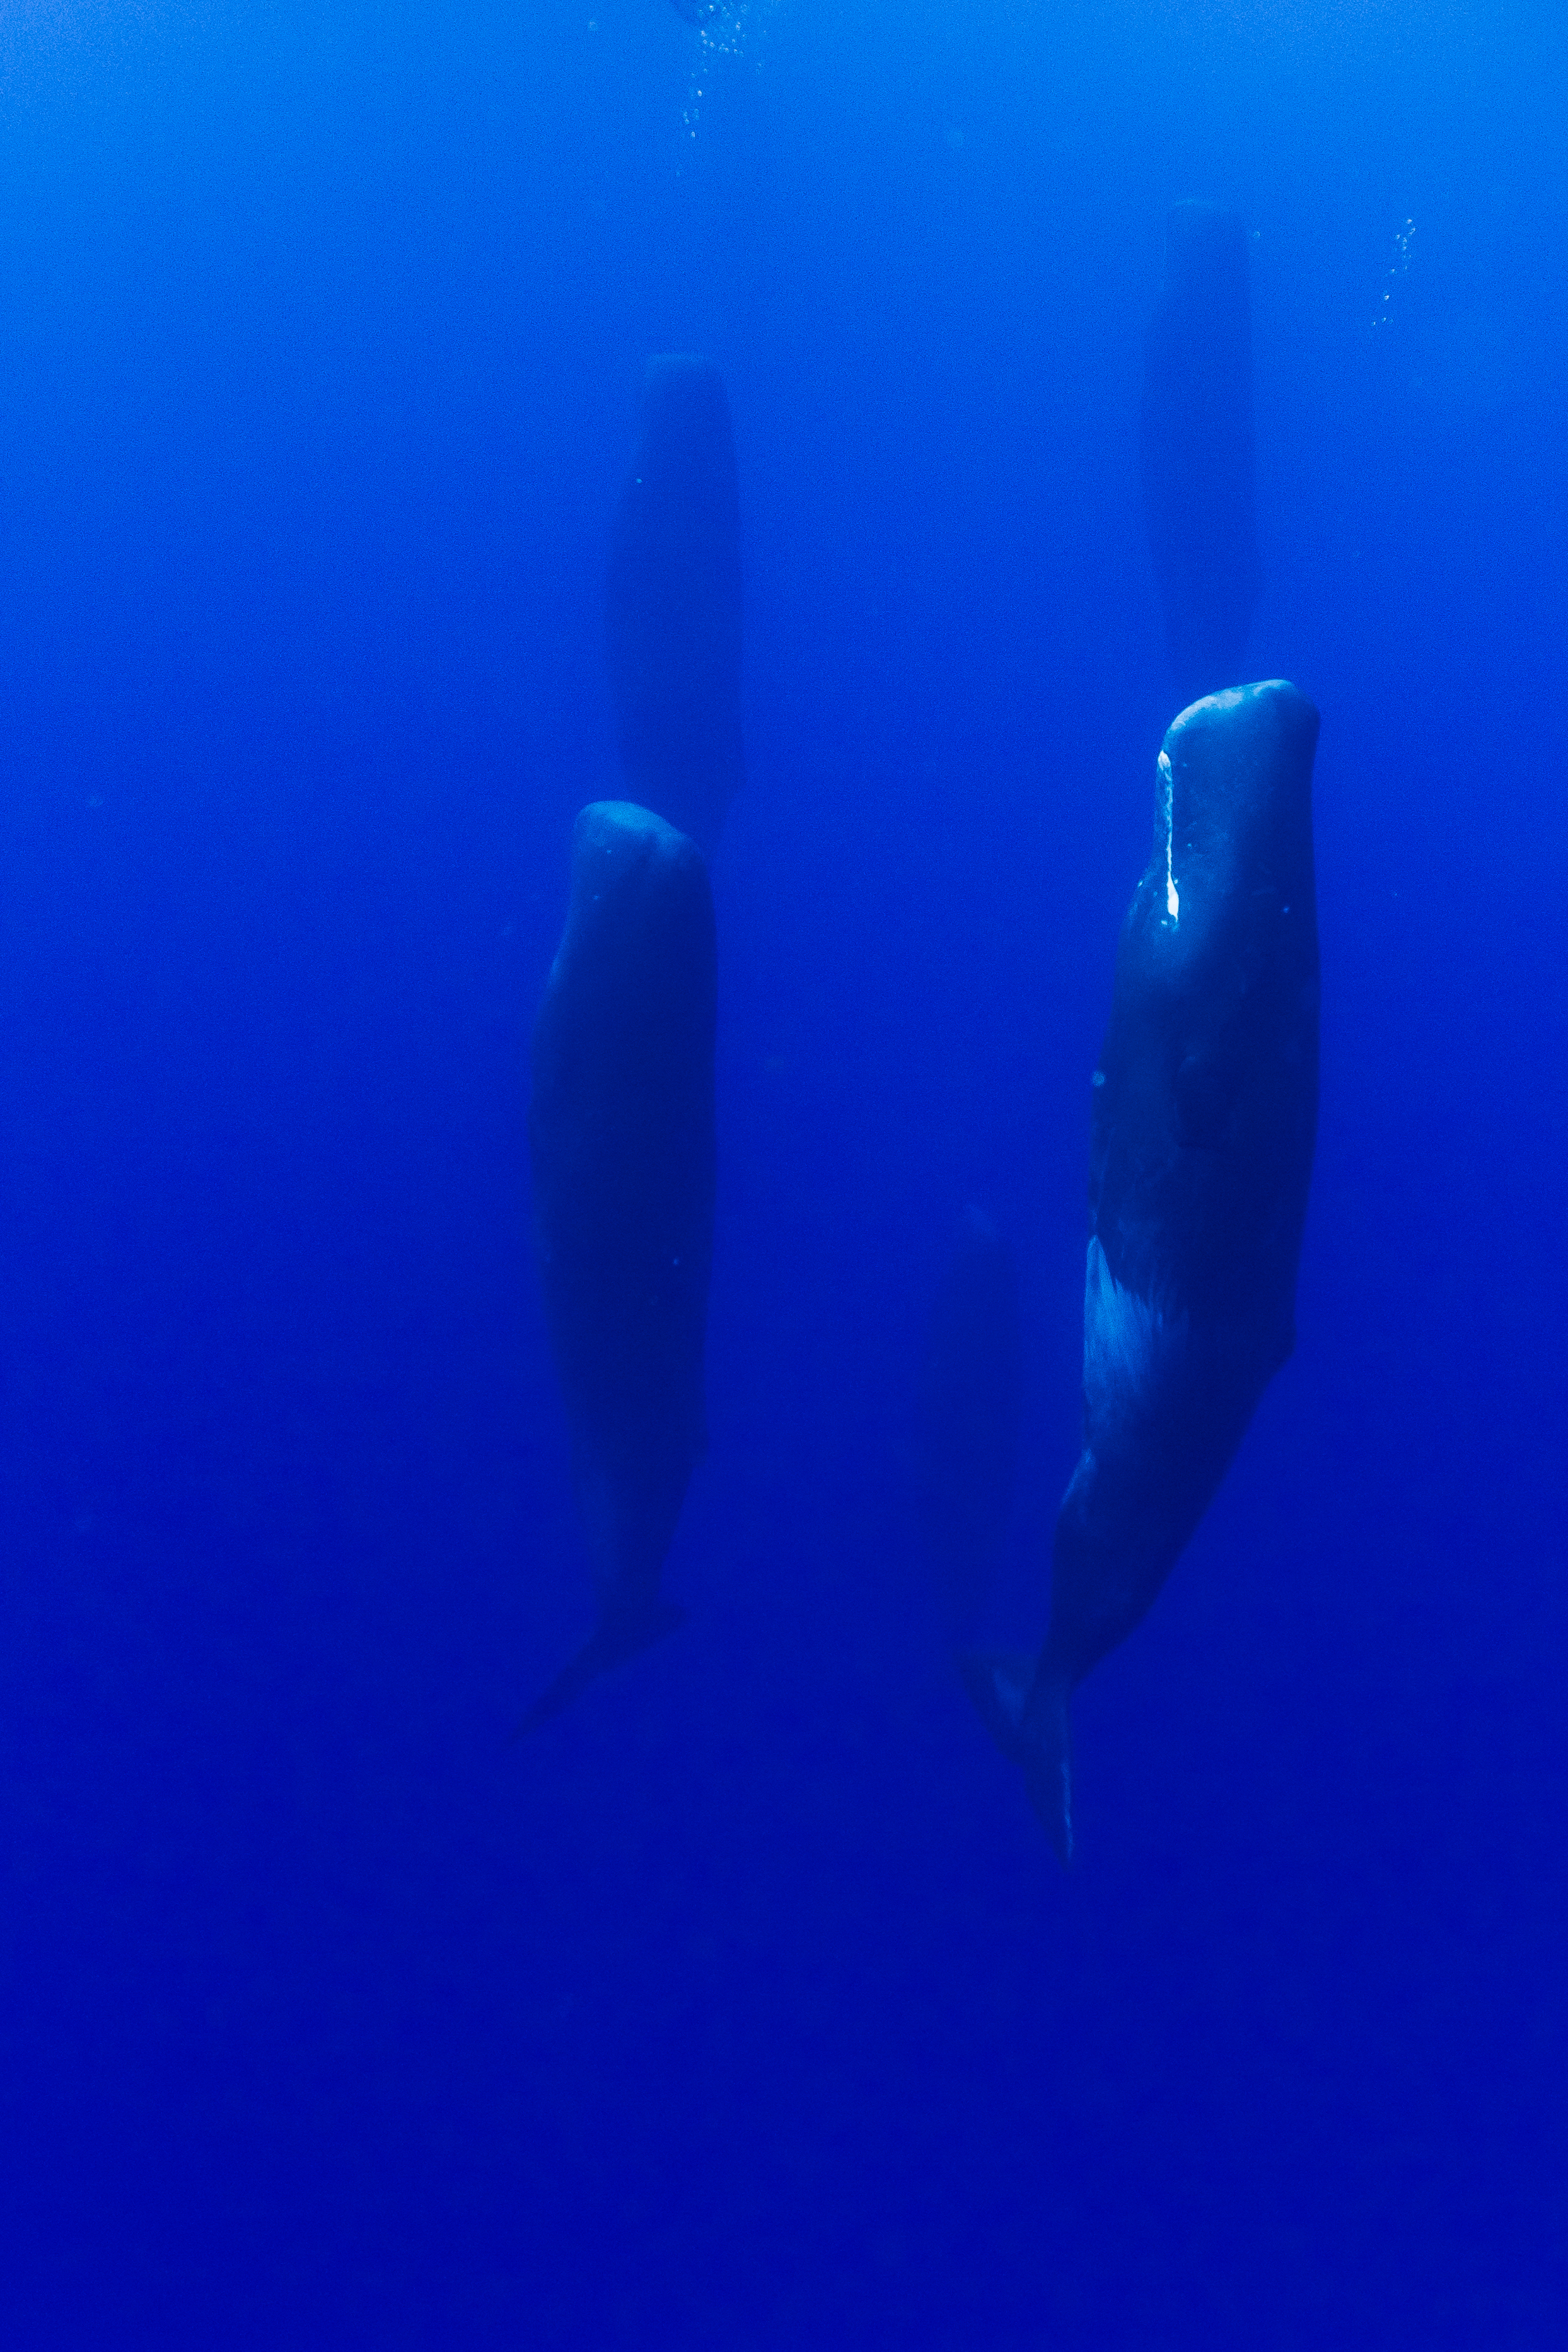 Two whales in the water lying vertically next to each other